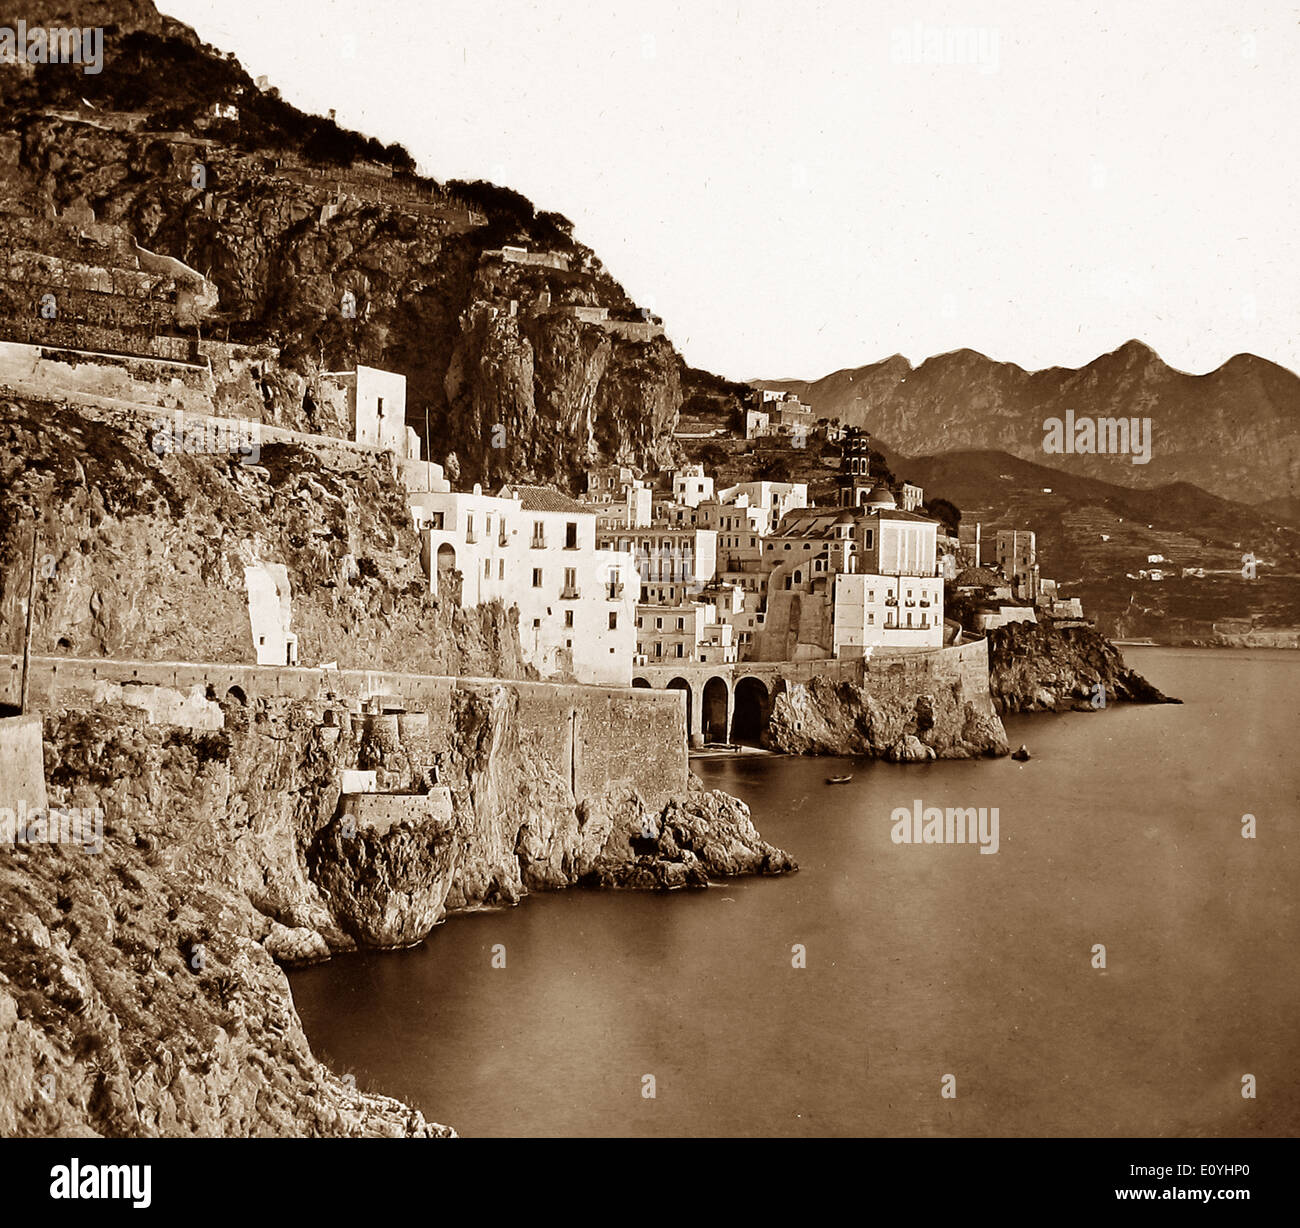 Pre 1900 High Resolution Stock Photography and Images - Alamy